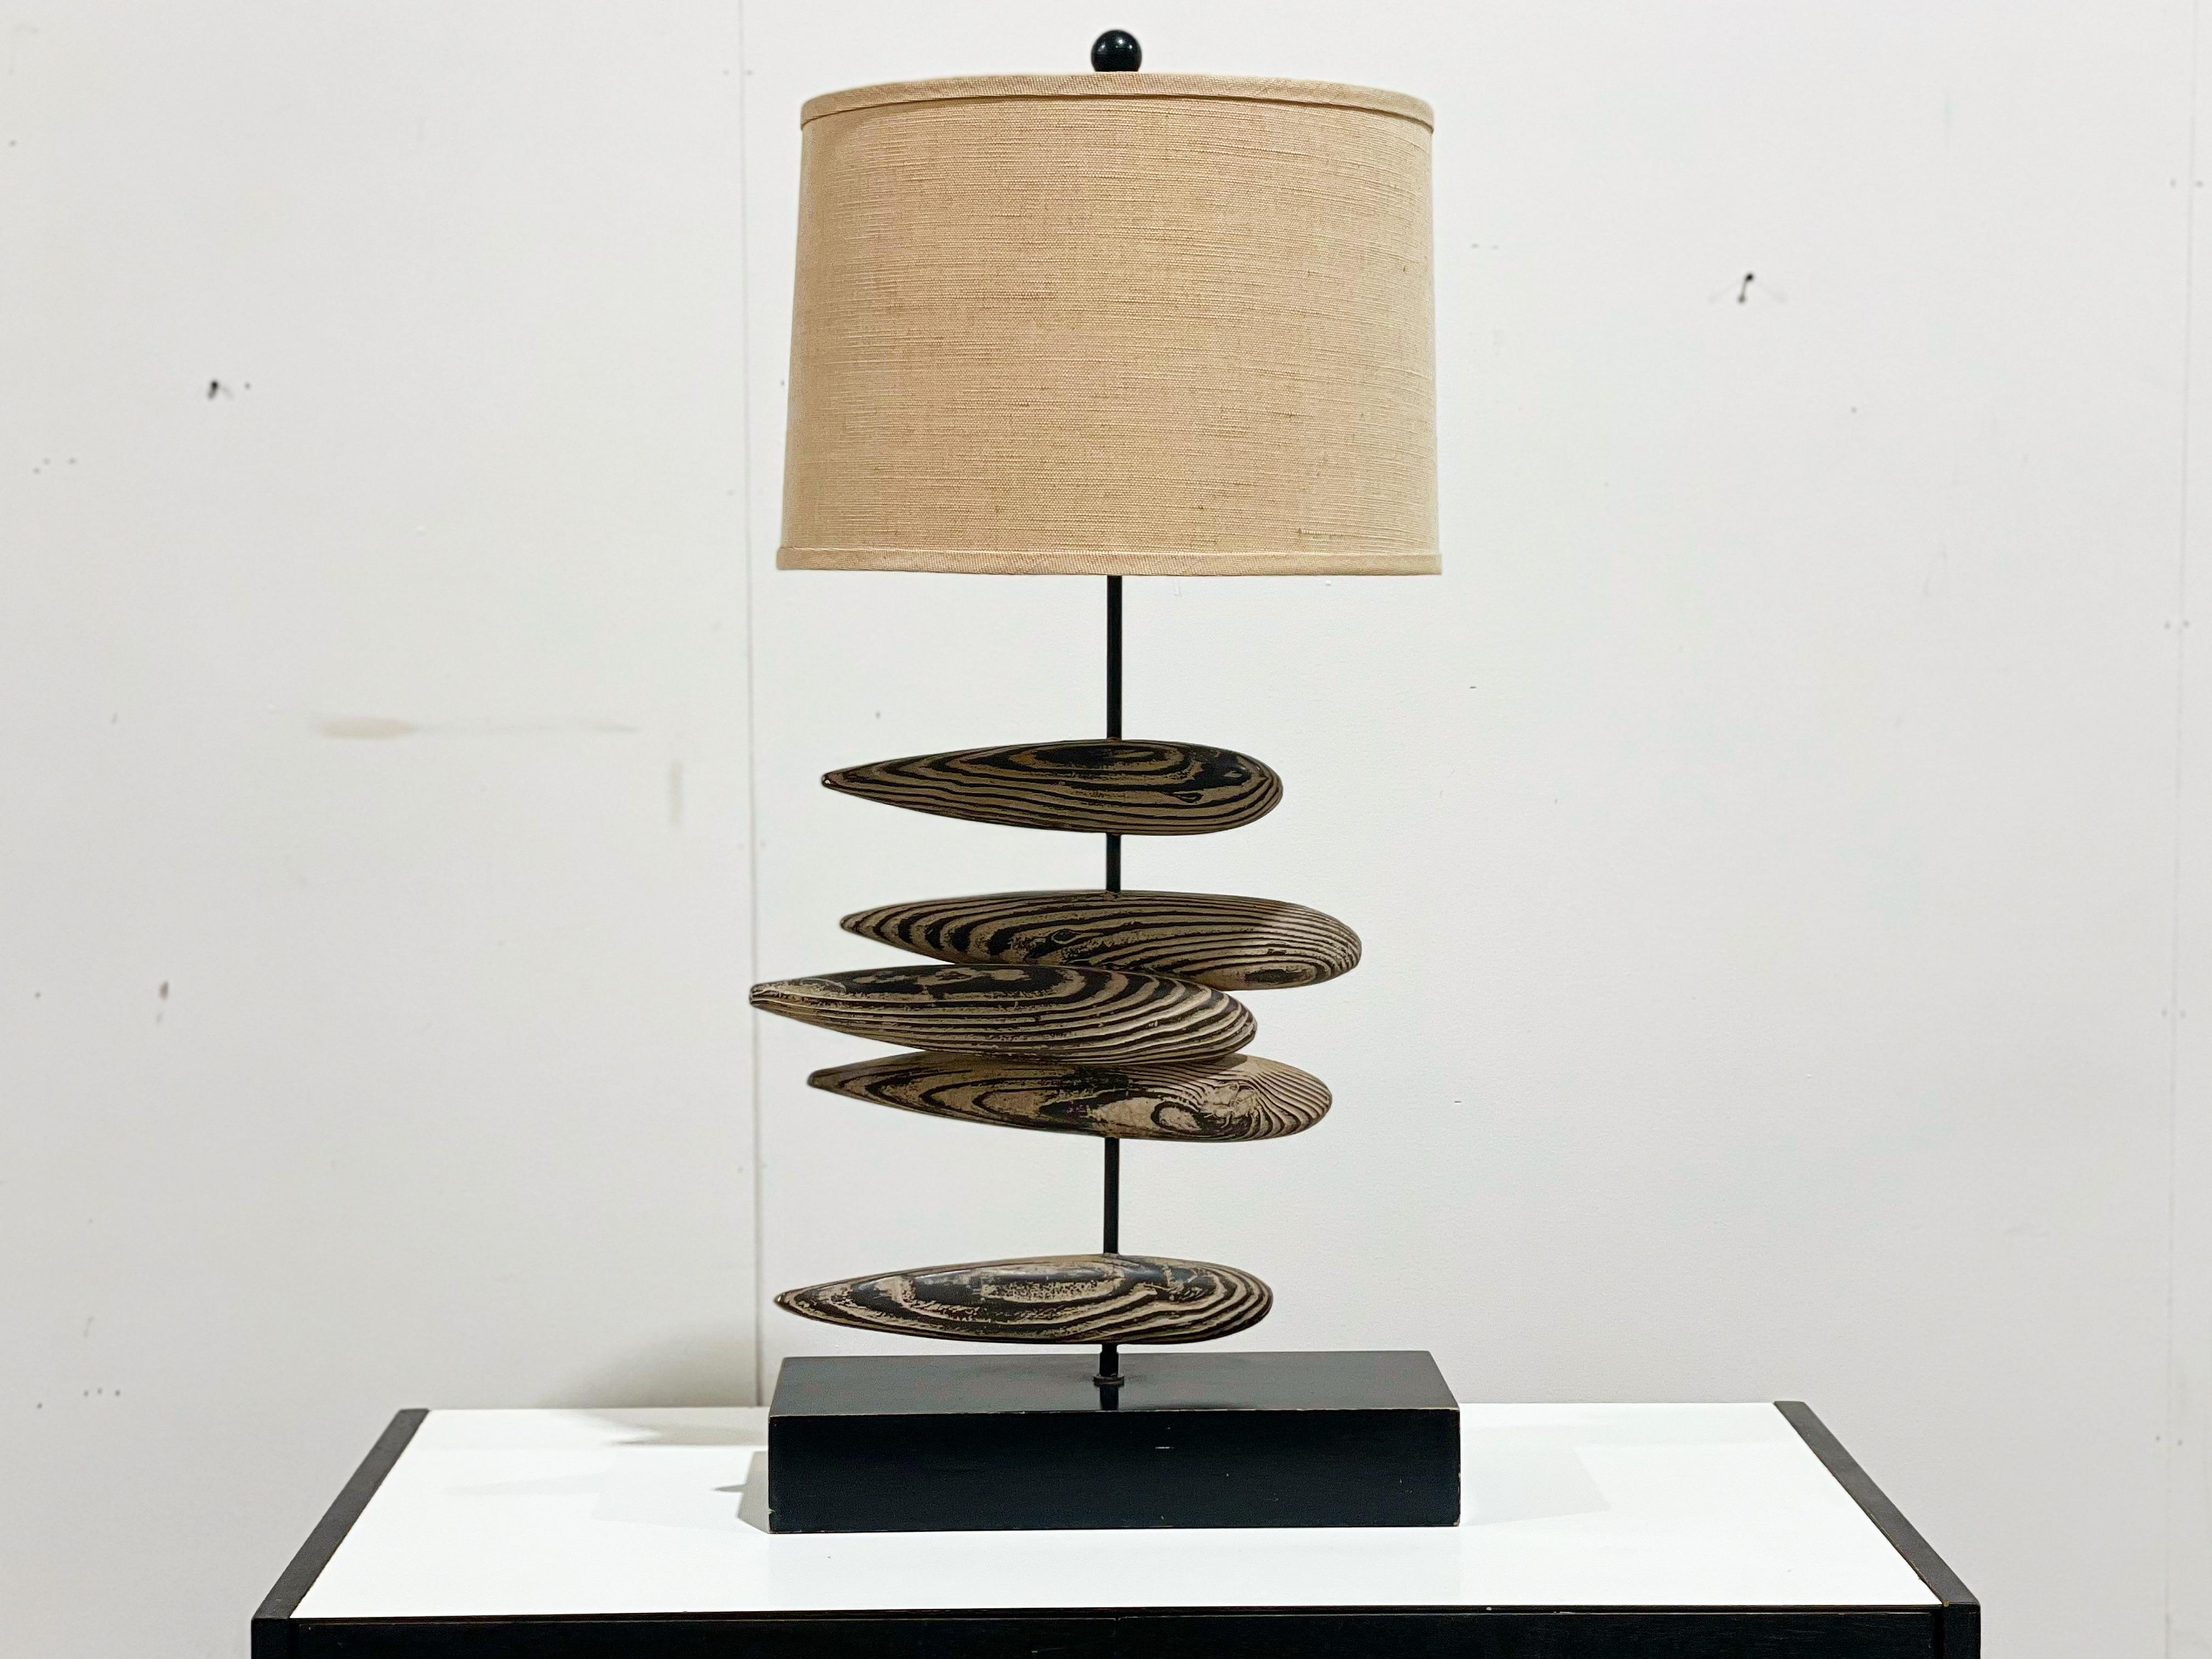 Midcentury modern sculpted faux driftwood abstract fish table lamp. Gorgeous form and superb craftsmanship. 
Overall excellent condition. Black lacquered wood block base. Wiring and components in good working order. Original shade in excellent